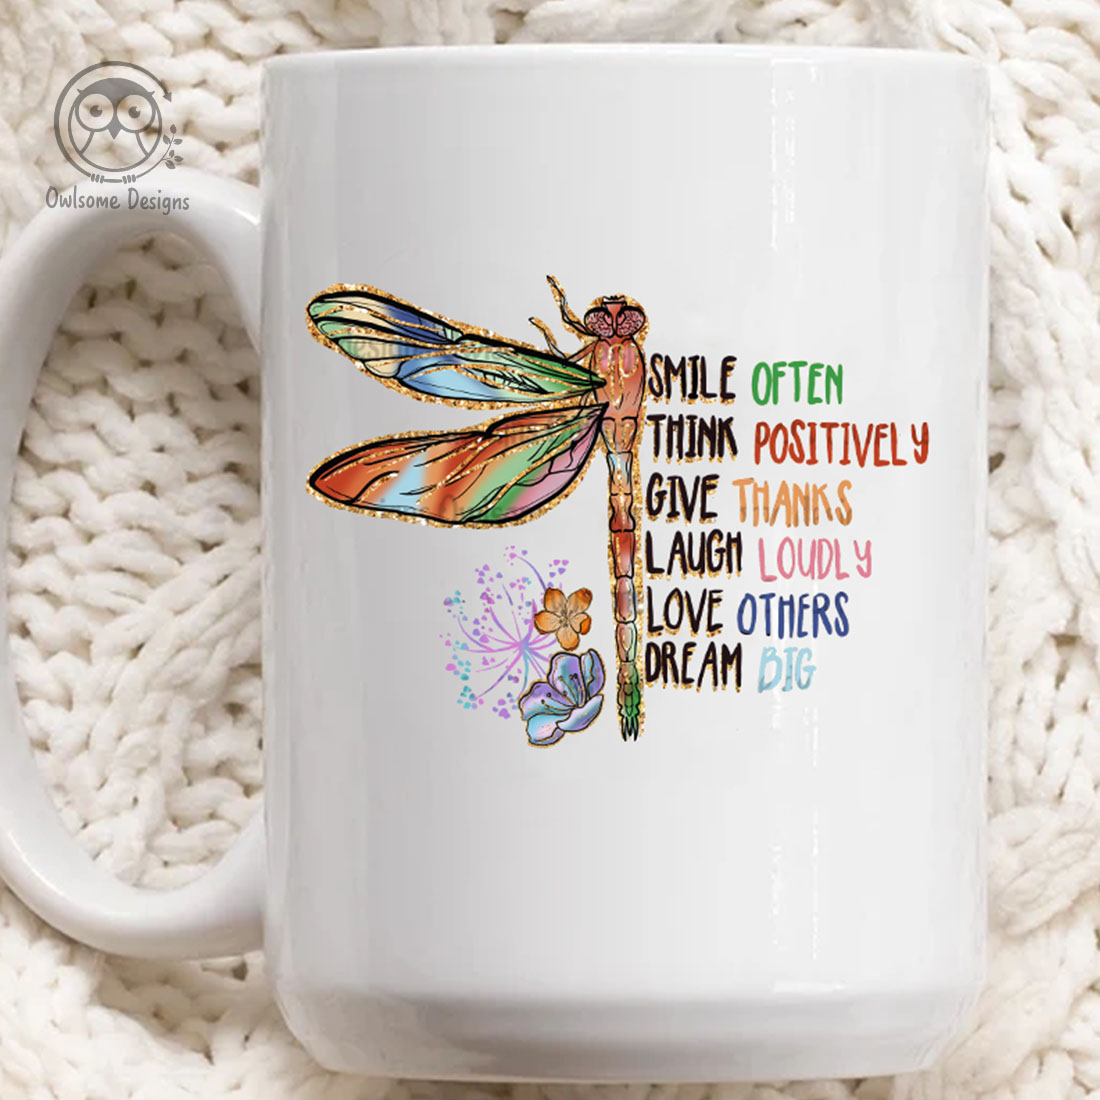 Image of cup with gorgeous dragonfly print and lettering.